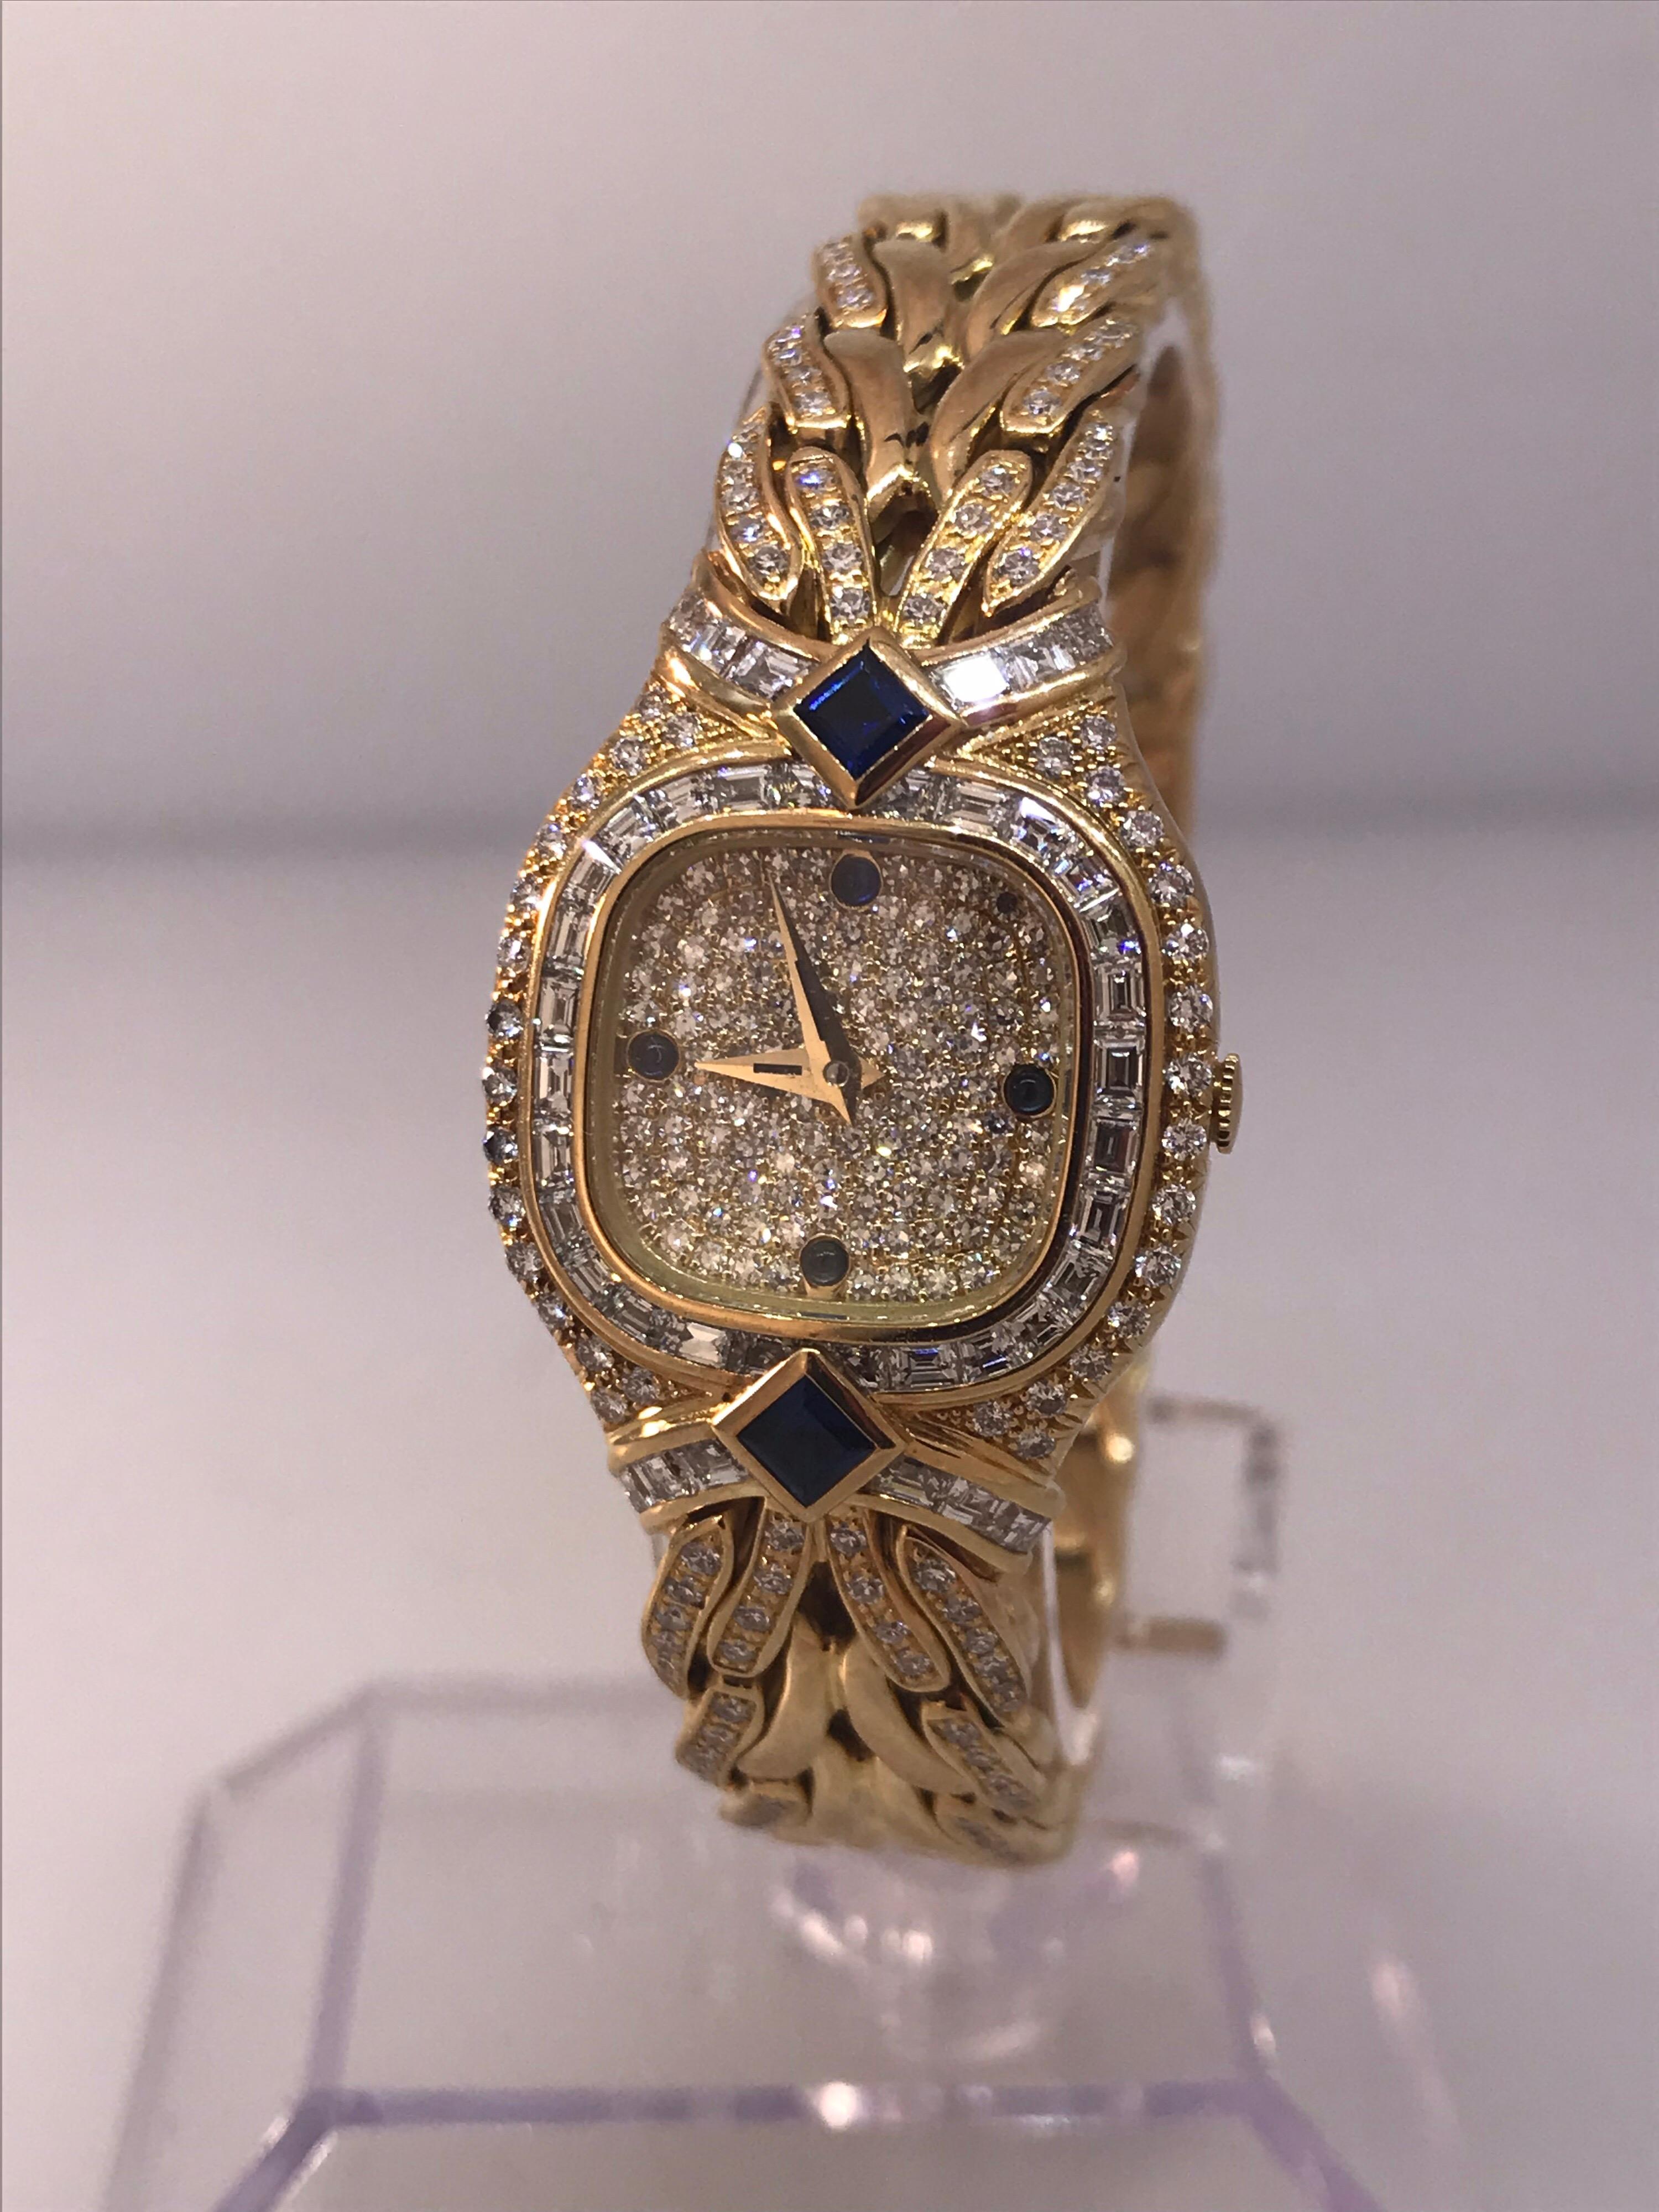 Patek La Flamme Ladies Watch

Model Number 4808

100% Authentic

New / Old Stock

Comes with a generic watch box

18 Karat Yellow Gold

Bezel set with:

	 40 Square cut diamonds (APPROX. 1.40 Carats)
	 2 Large square cut blue sapphires (APPROX .37